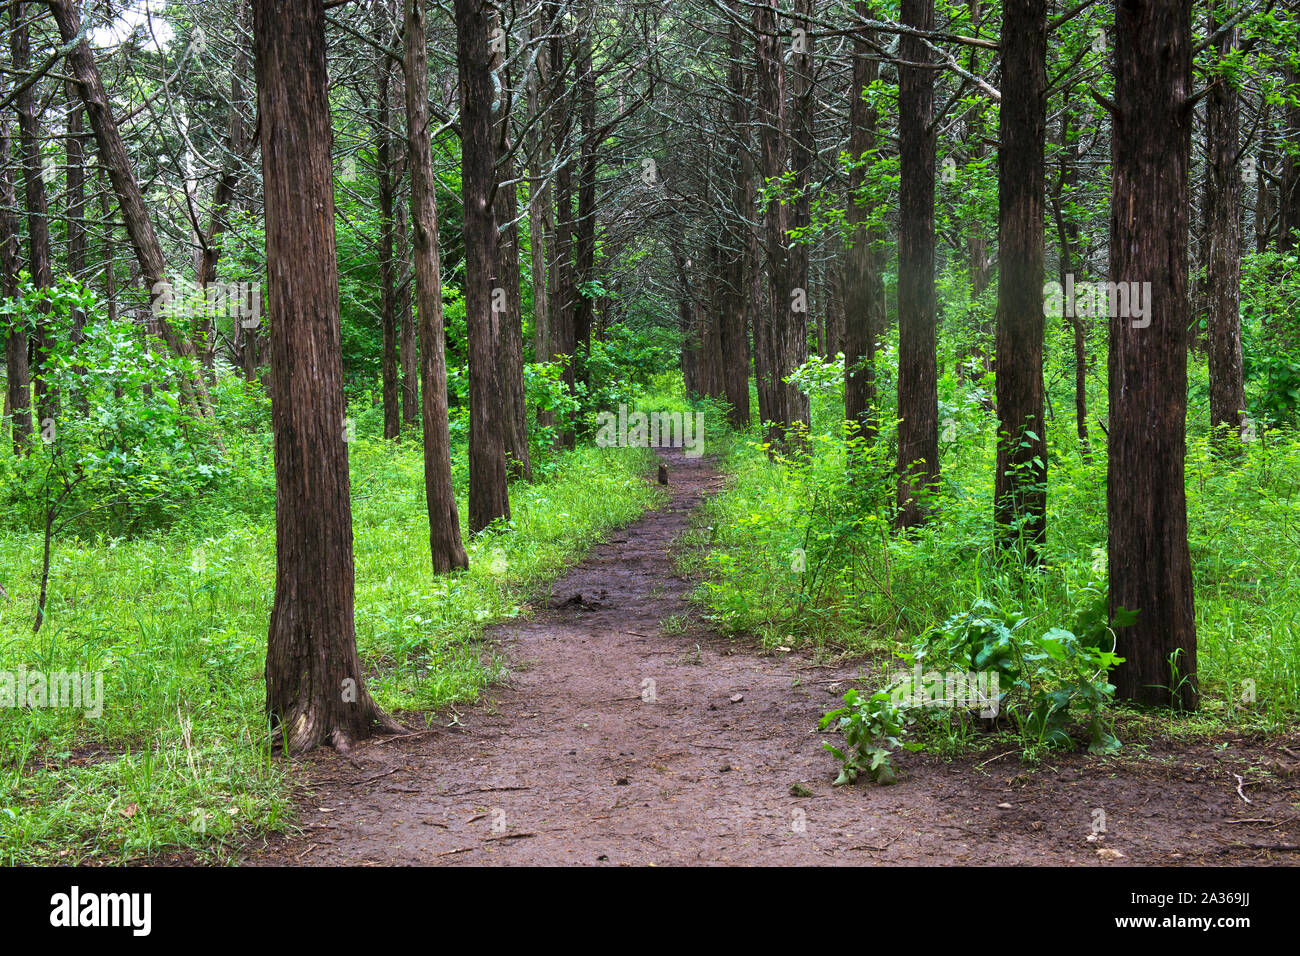 Pathway Through the Understory of Tall Trees Stock Photo